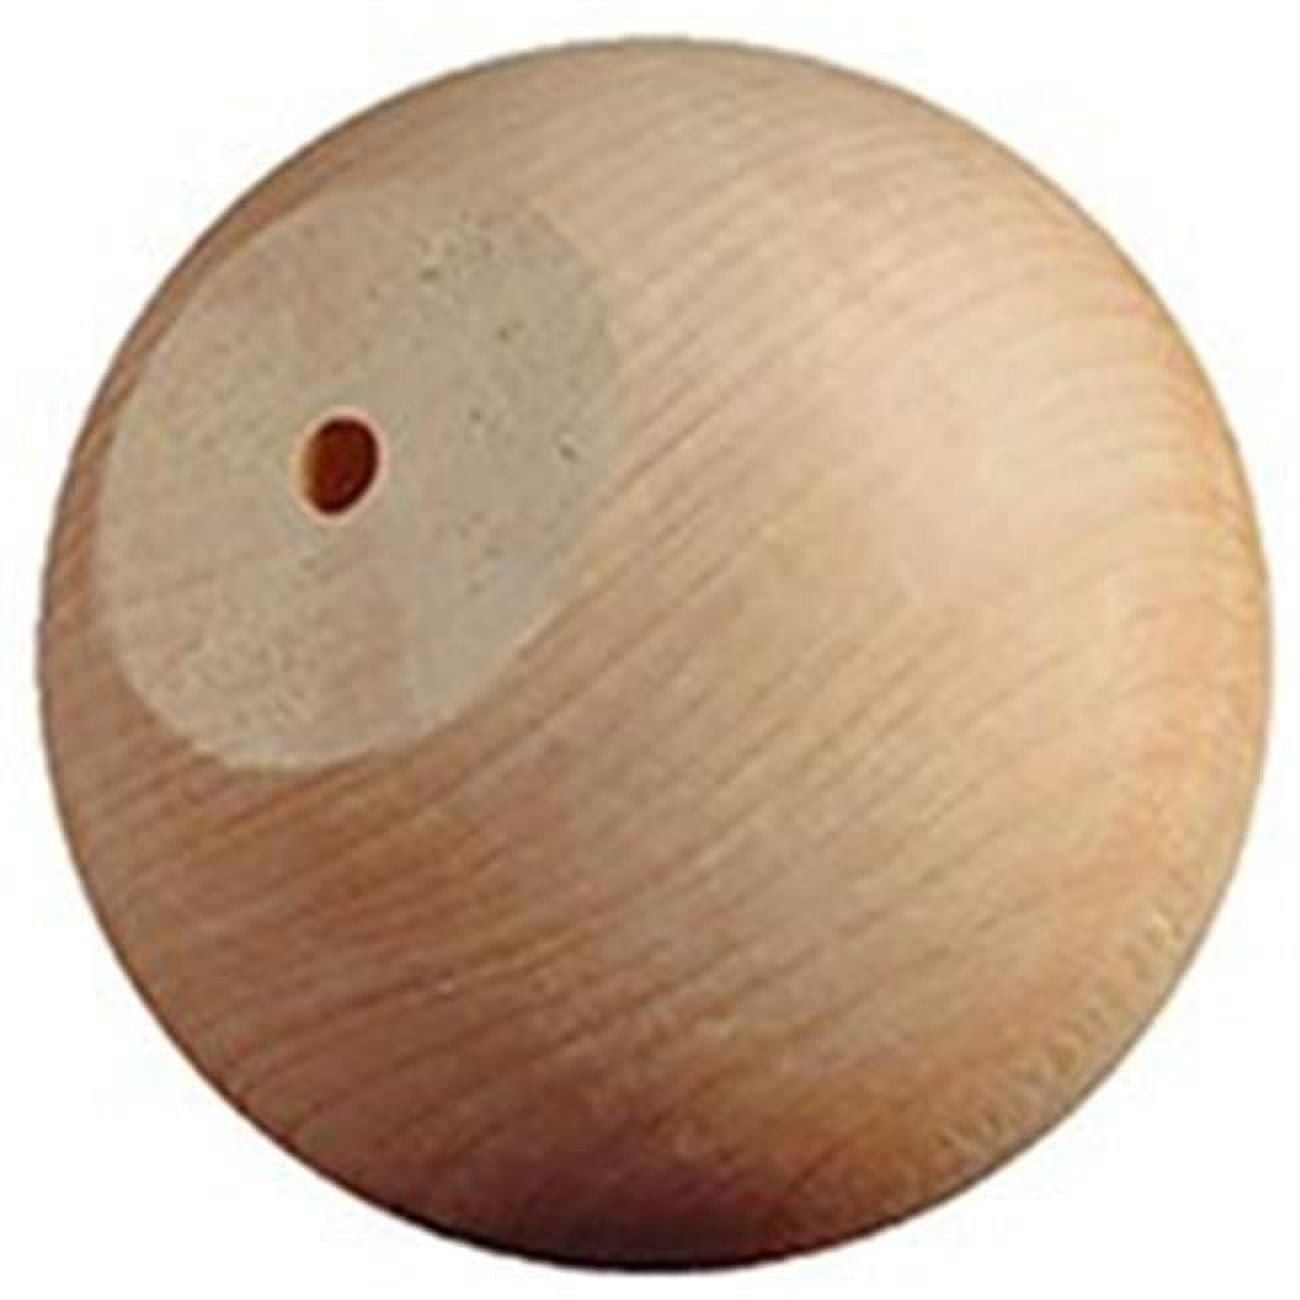 F-kb-125 1.25 In. Round Wood Knob - Pack Of 2